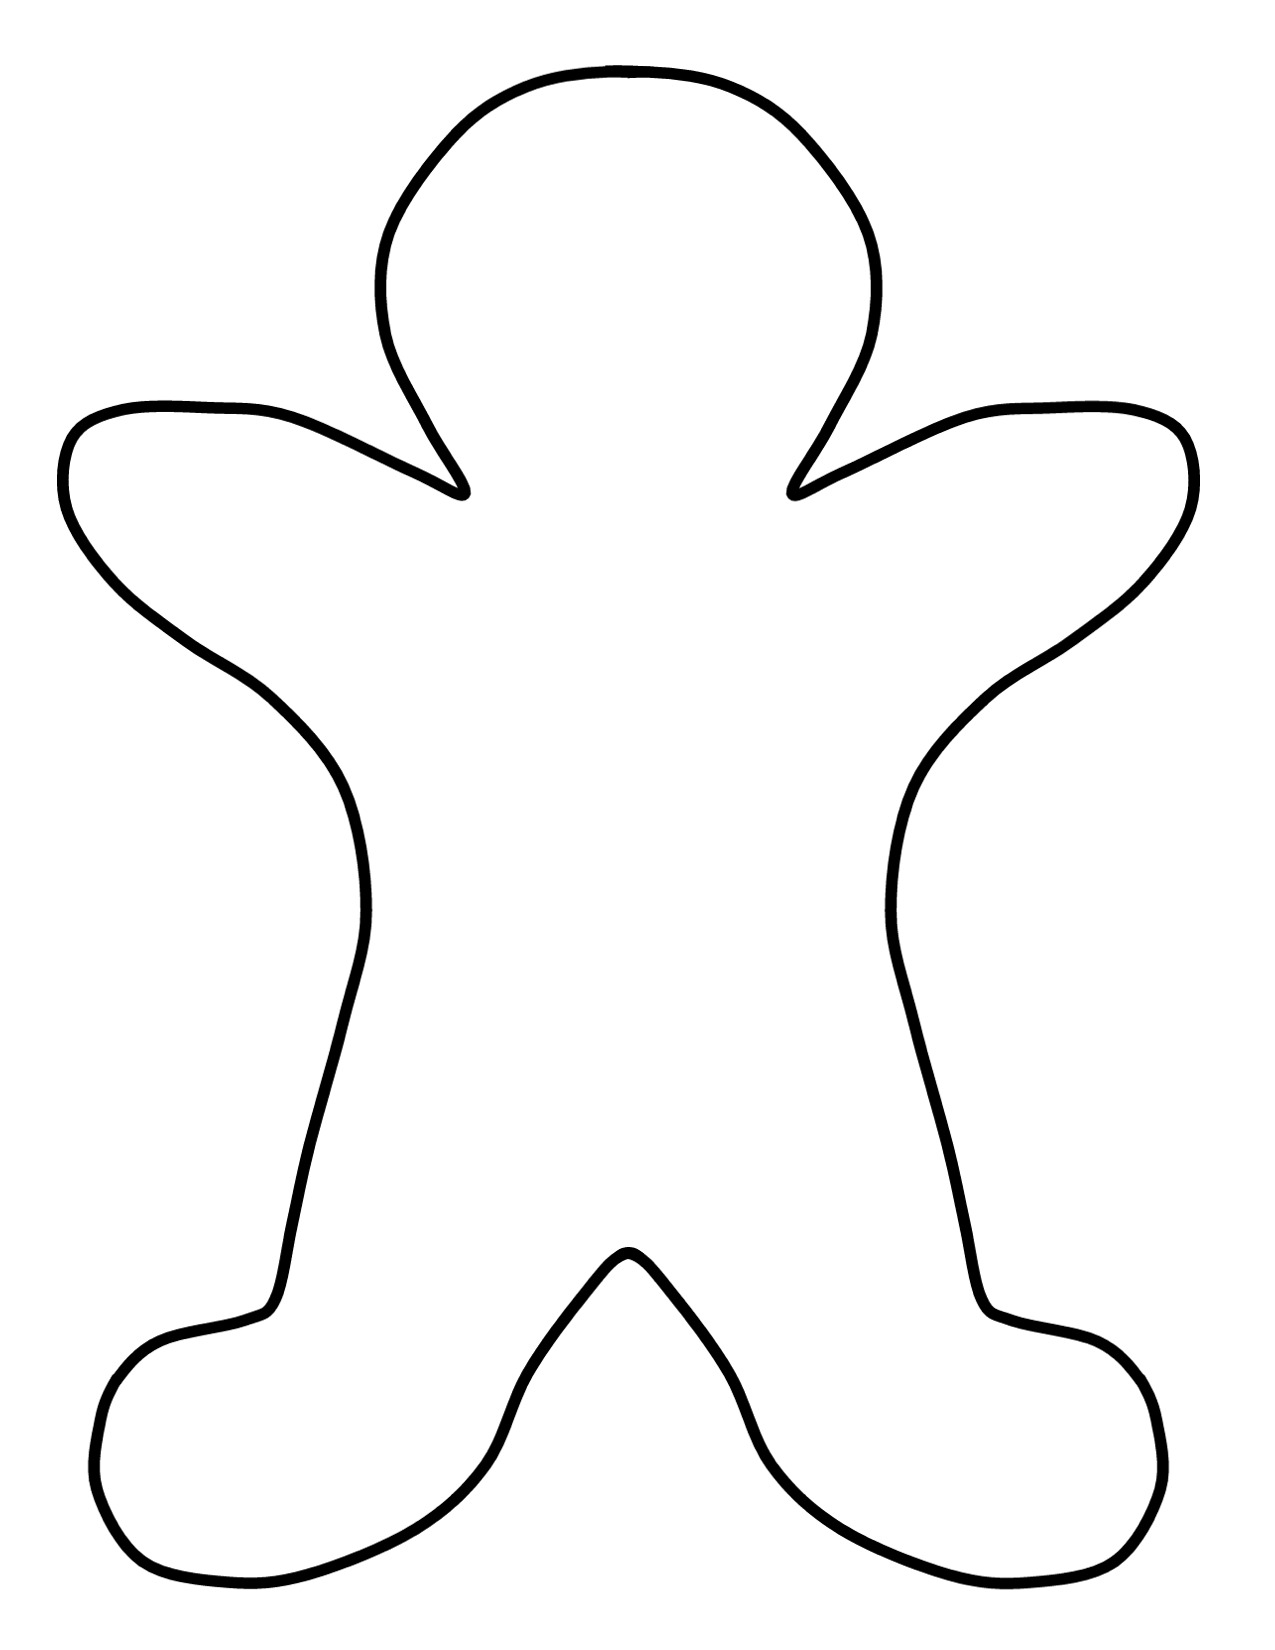 Gingerbread man clip art free free clipart images 5